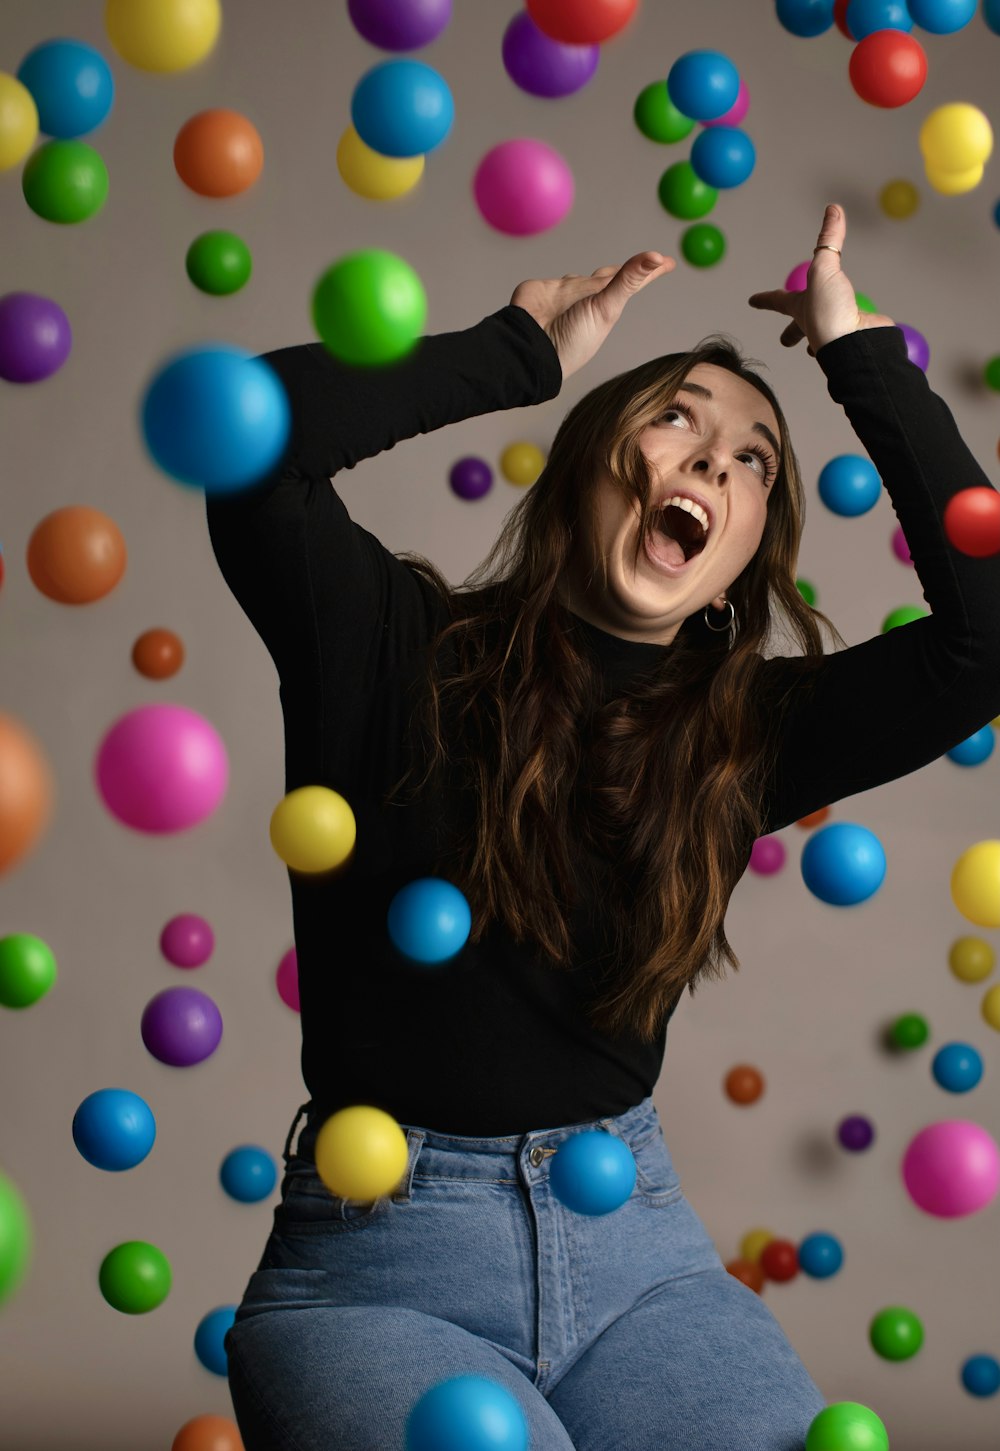 a woman in a black shirt and jeans is surrounded by balloons